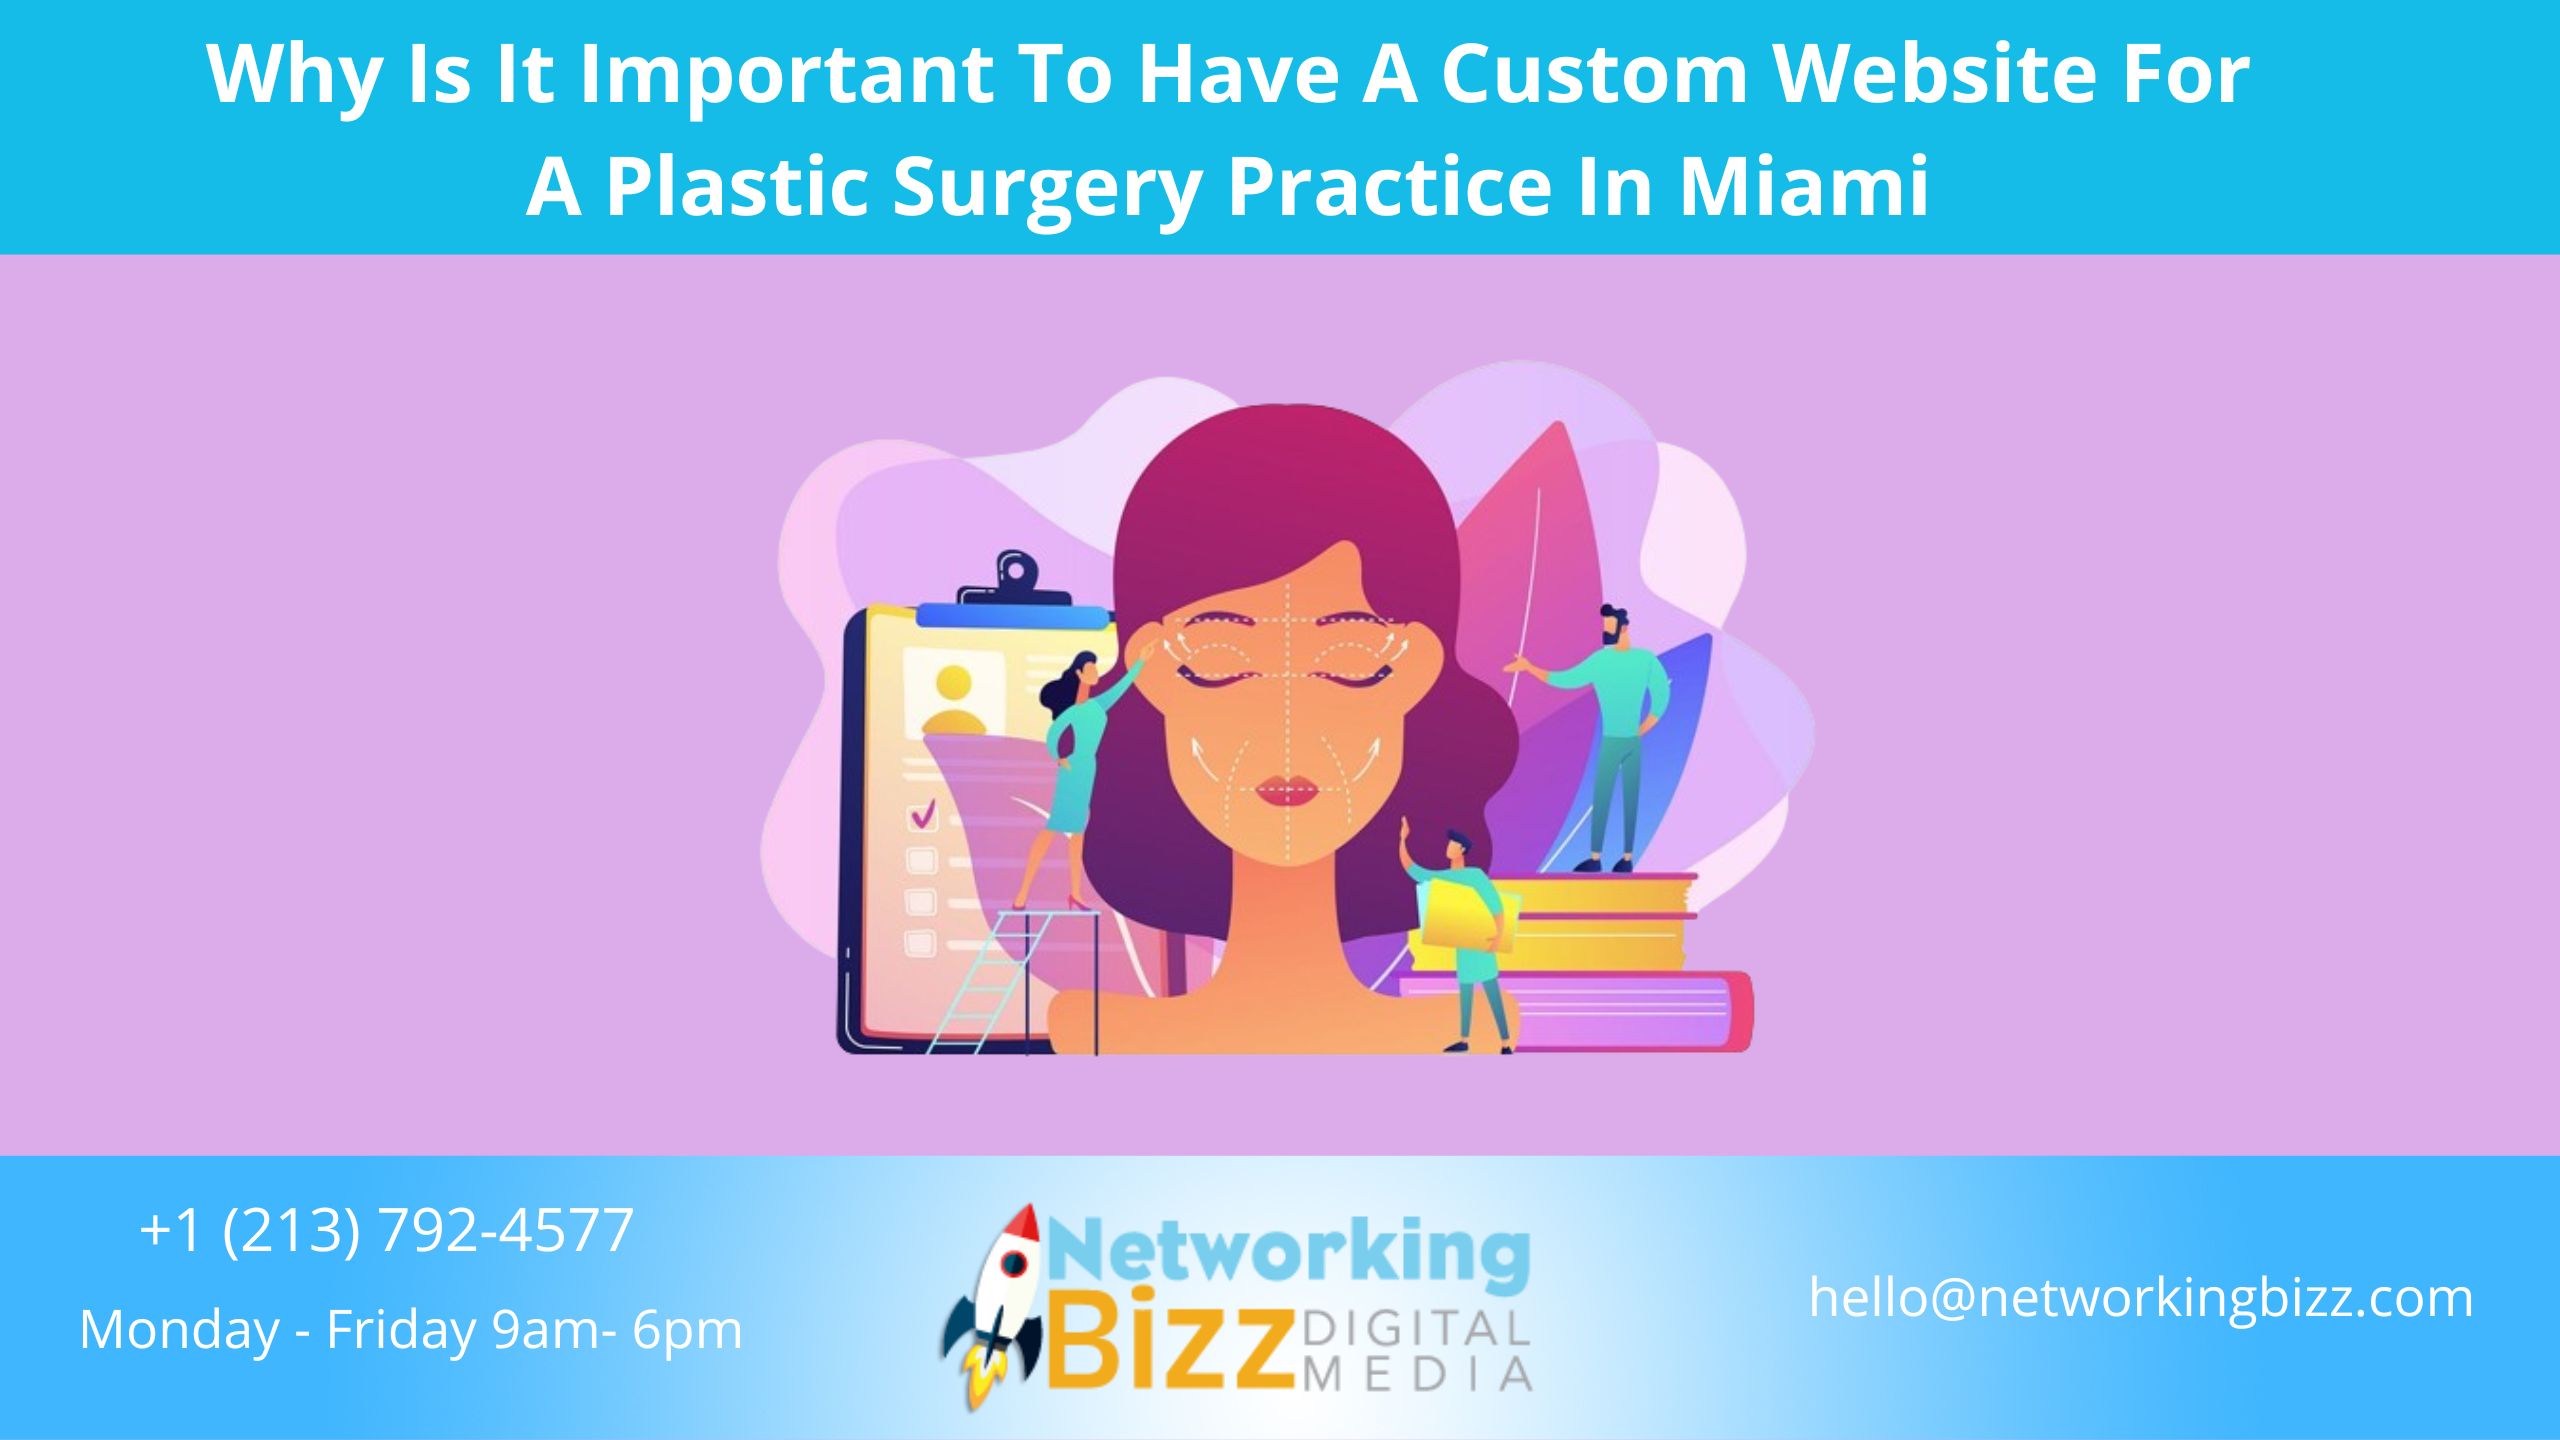 Why Is It Important To Have A Custom Website For A Plastic Surgery Practice In Miami